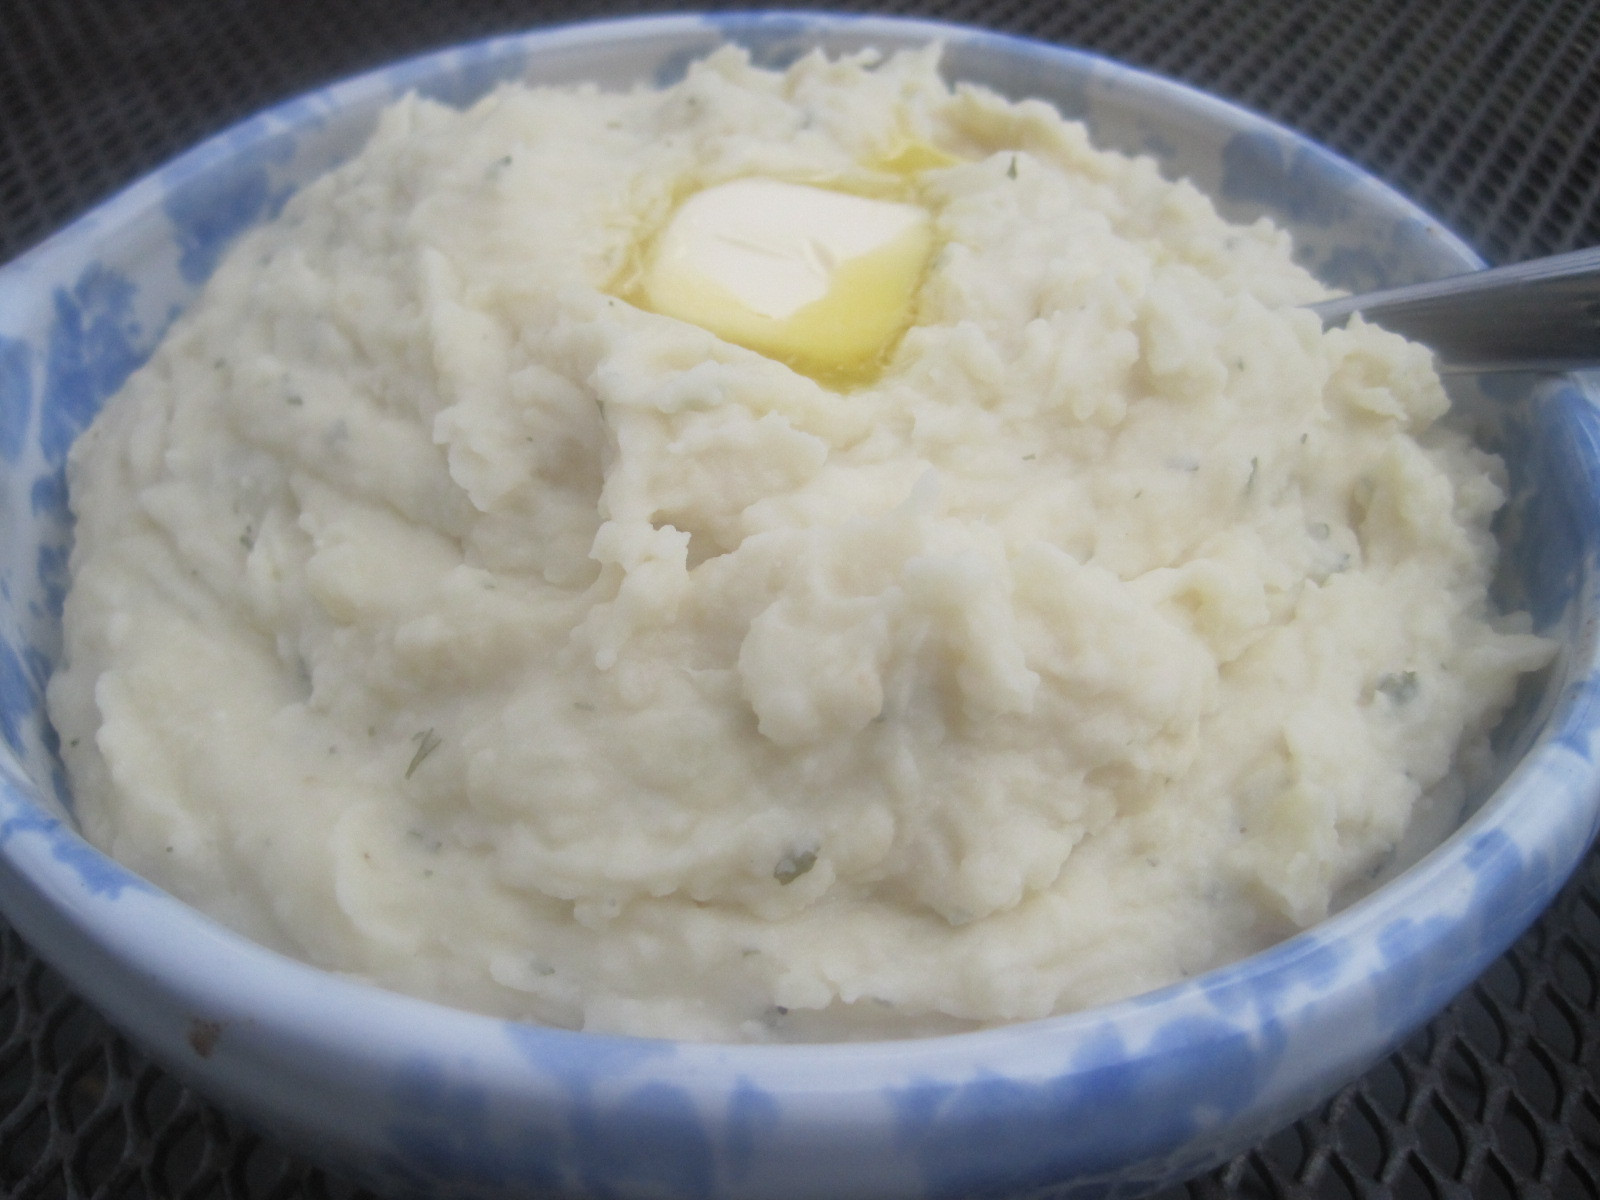 Mashed Potatoes In Crock Pot
 Keeping it Simple Crock Pot Mashed Potatoes